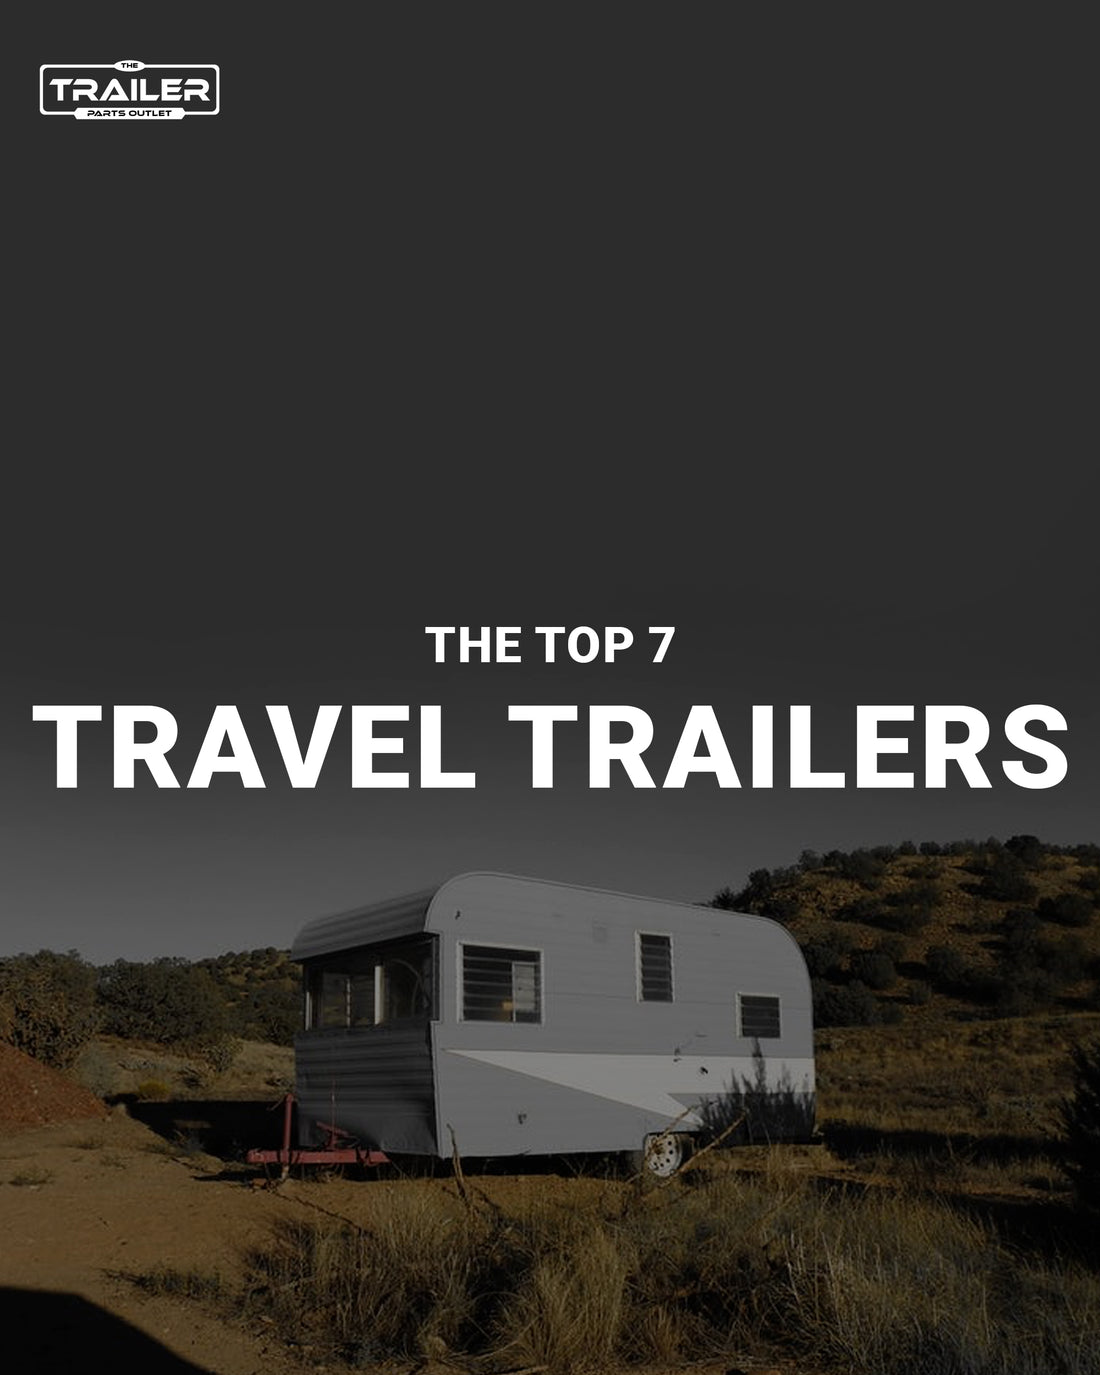 The Top 7 Travel Trailers